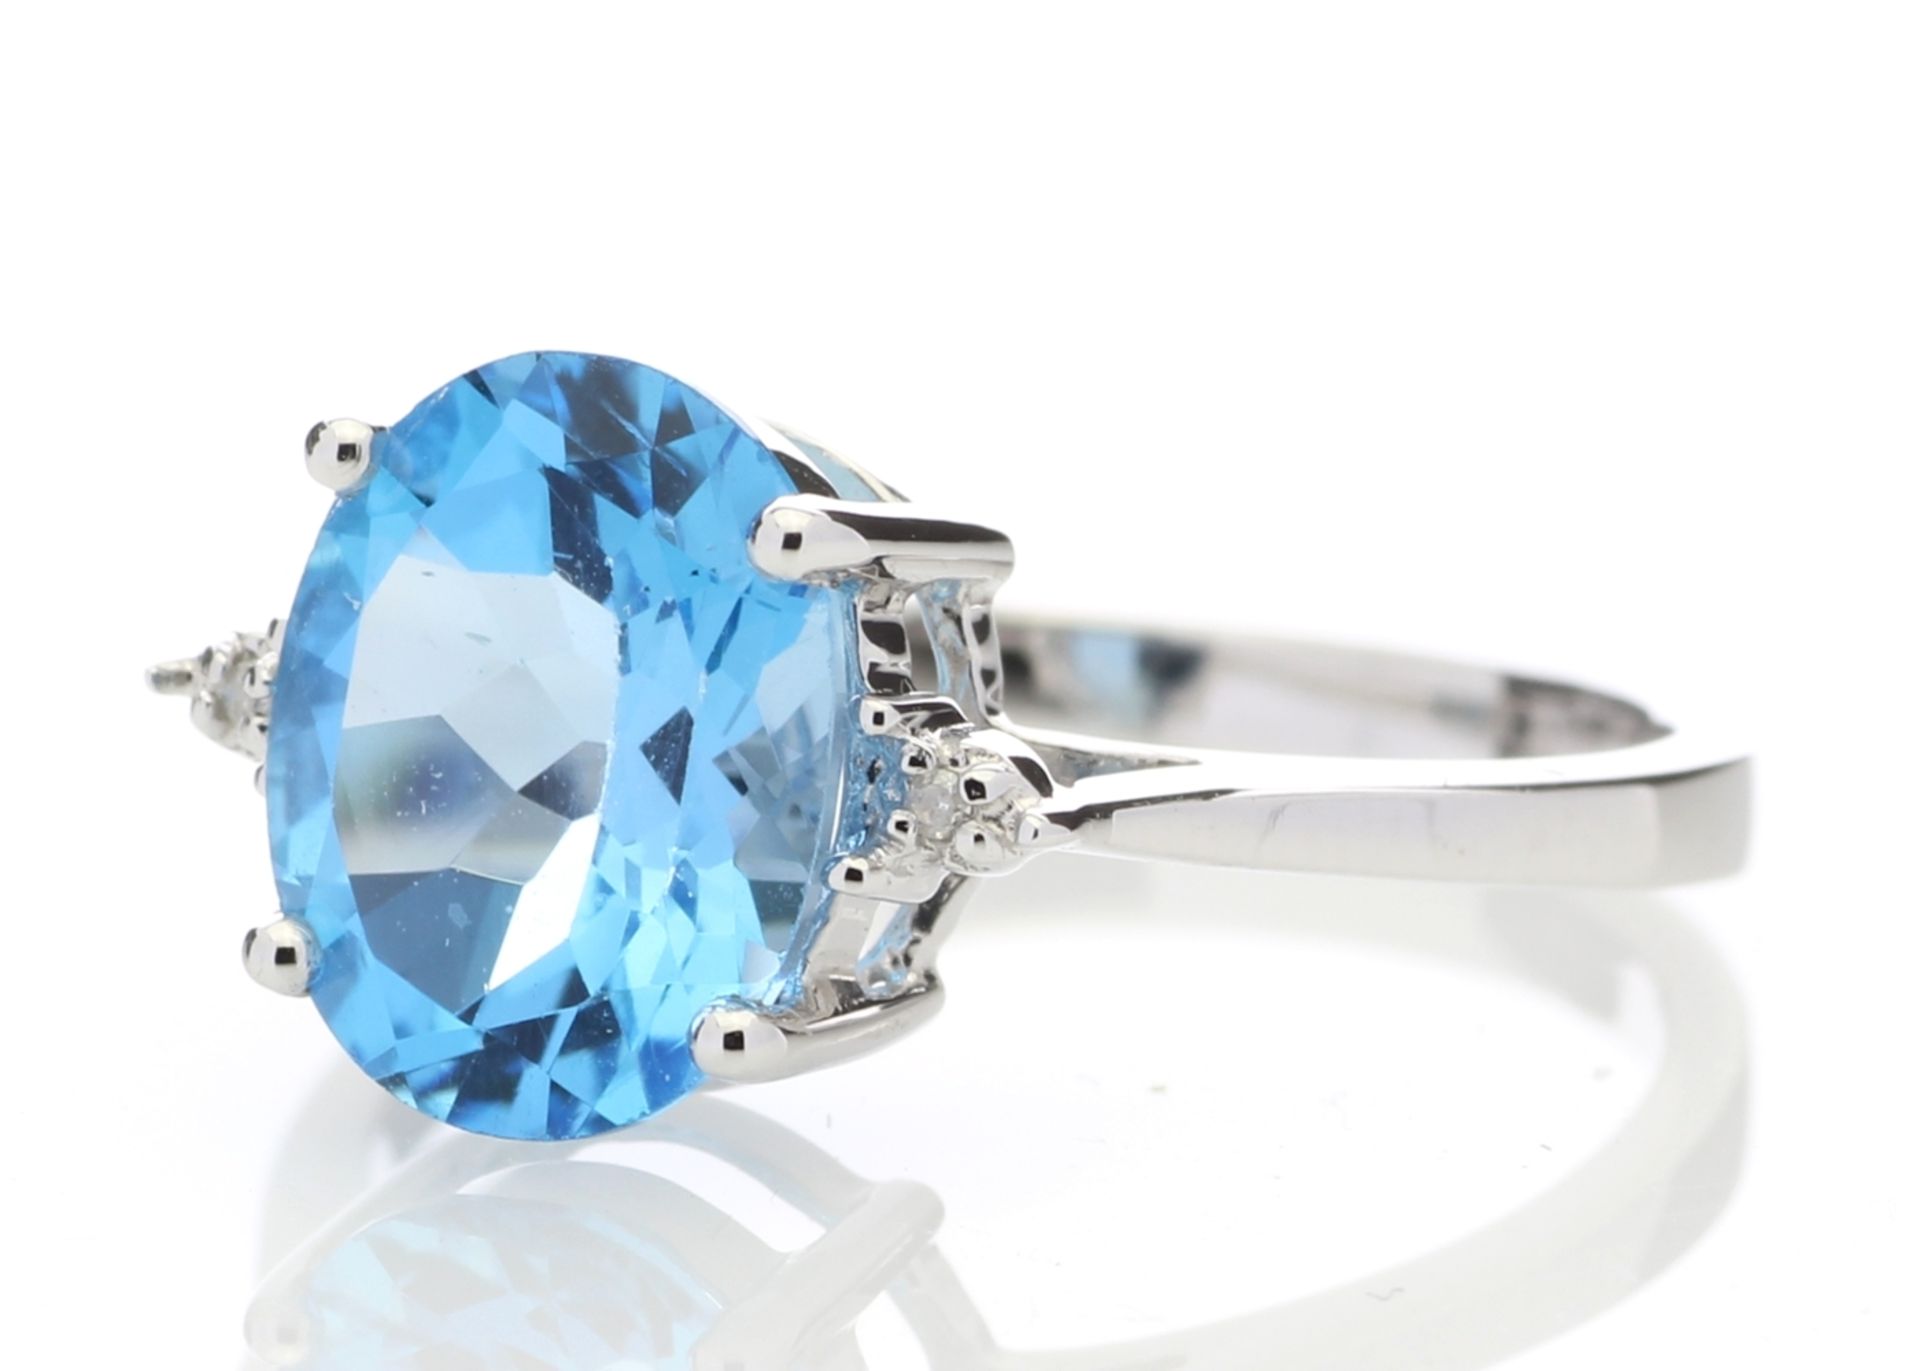 9ct White Gold Diamond And Blue Topaz Ring 0.01 Carats - Valued by GIE £1,370.00 - 9ct White Gold - Image 2 of 6